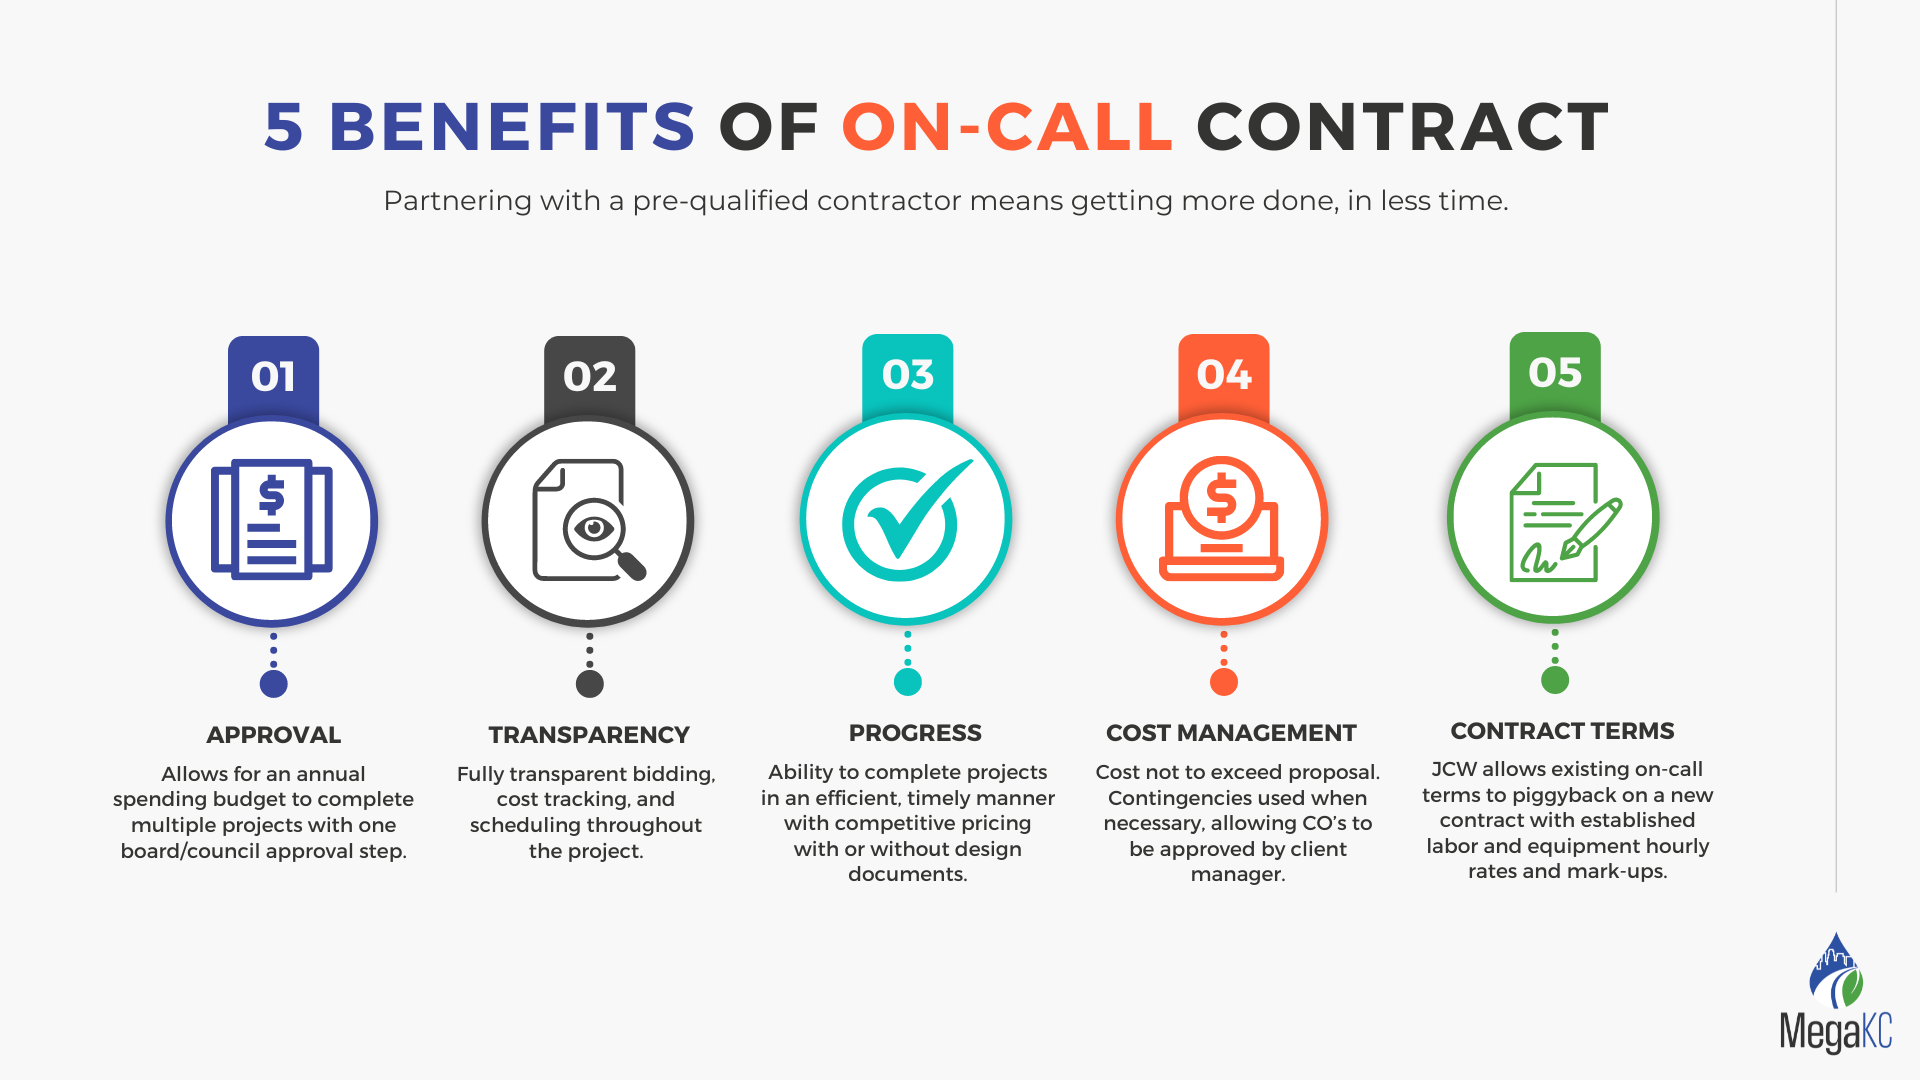 5 Benefits of an On-Call Contract